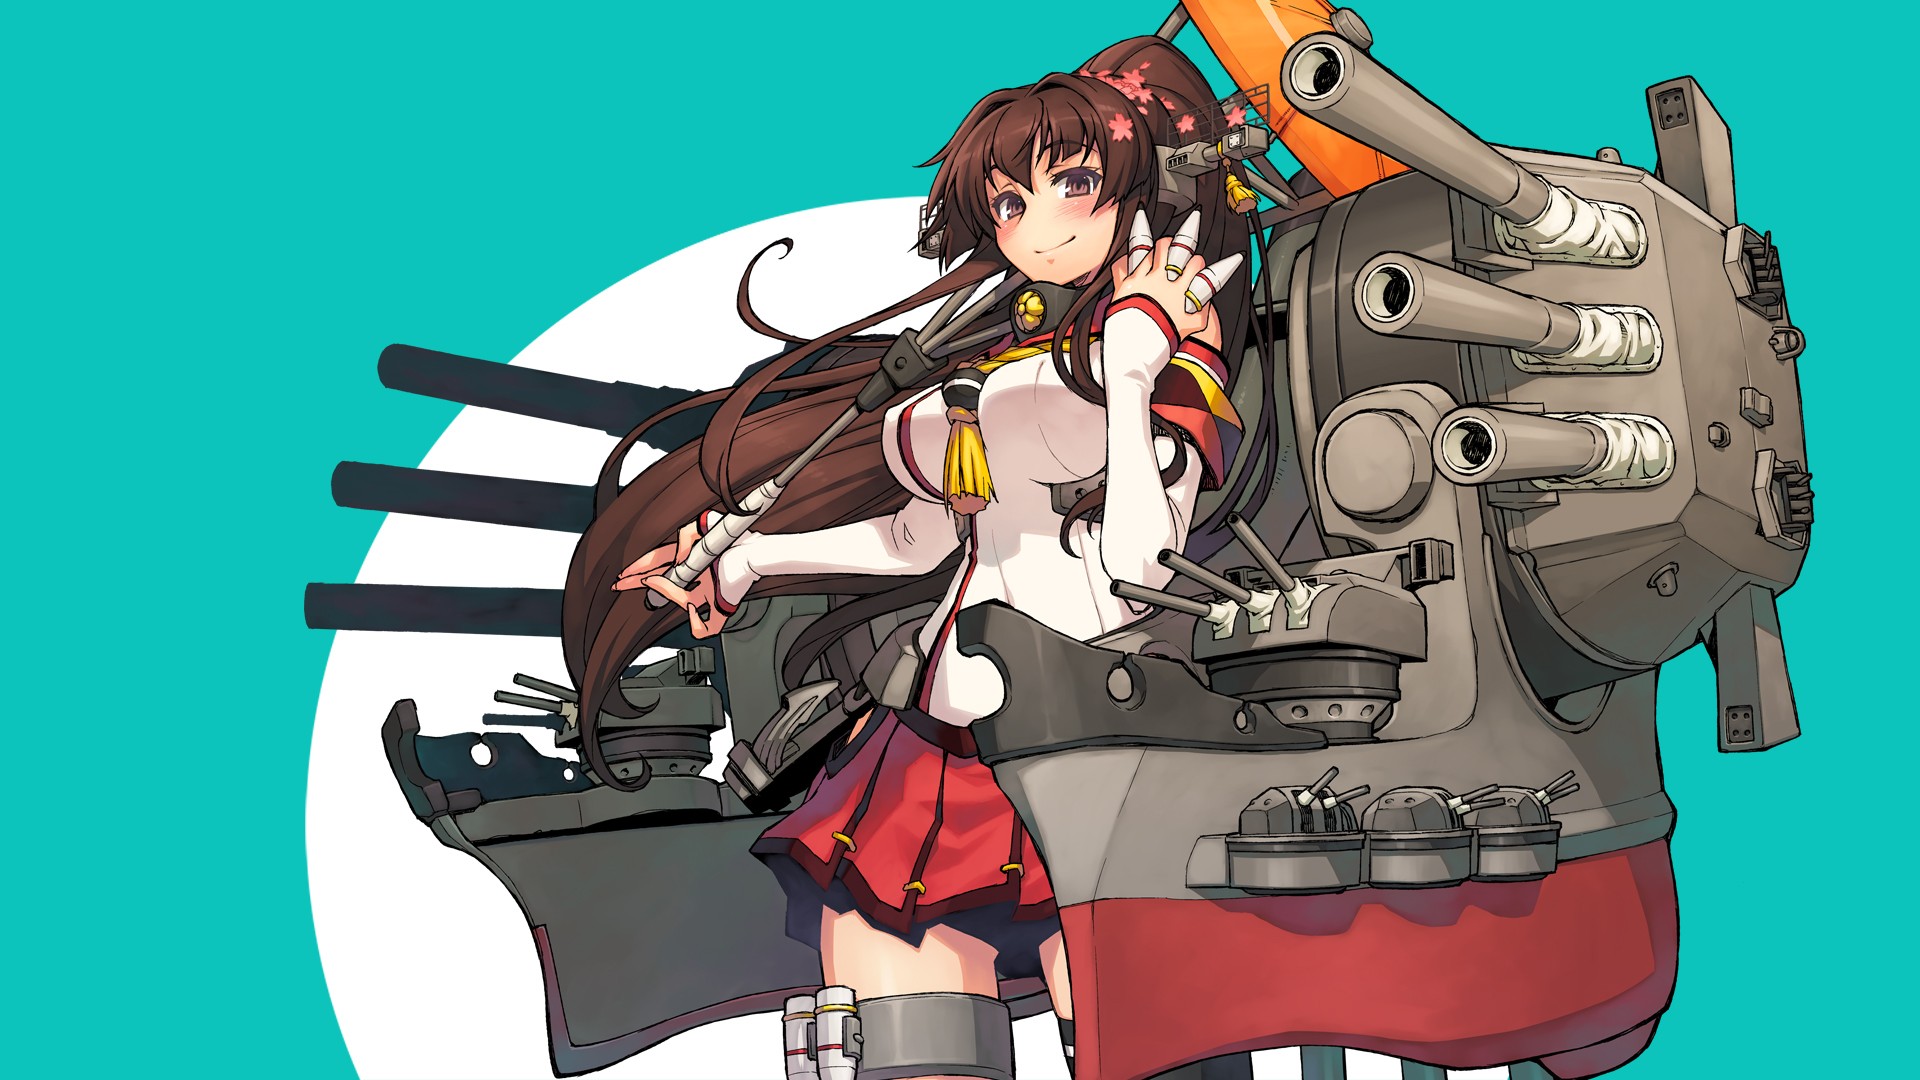 Anime 1920x1080 anime Kantai Collection Yamato (KanColle) anime girls cyan cyan background boobs big boobs brunette smiling long hair simple background